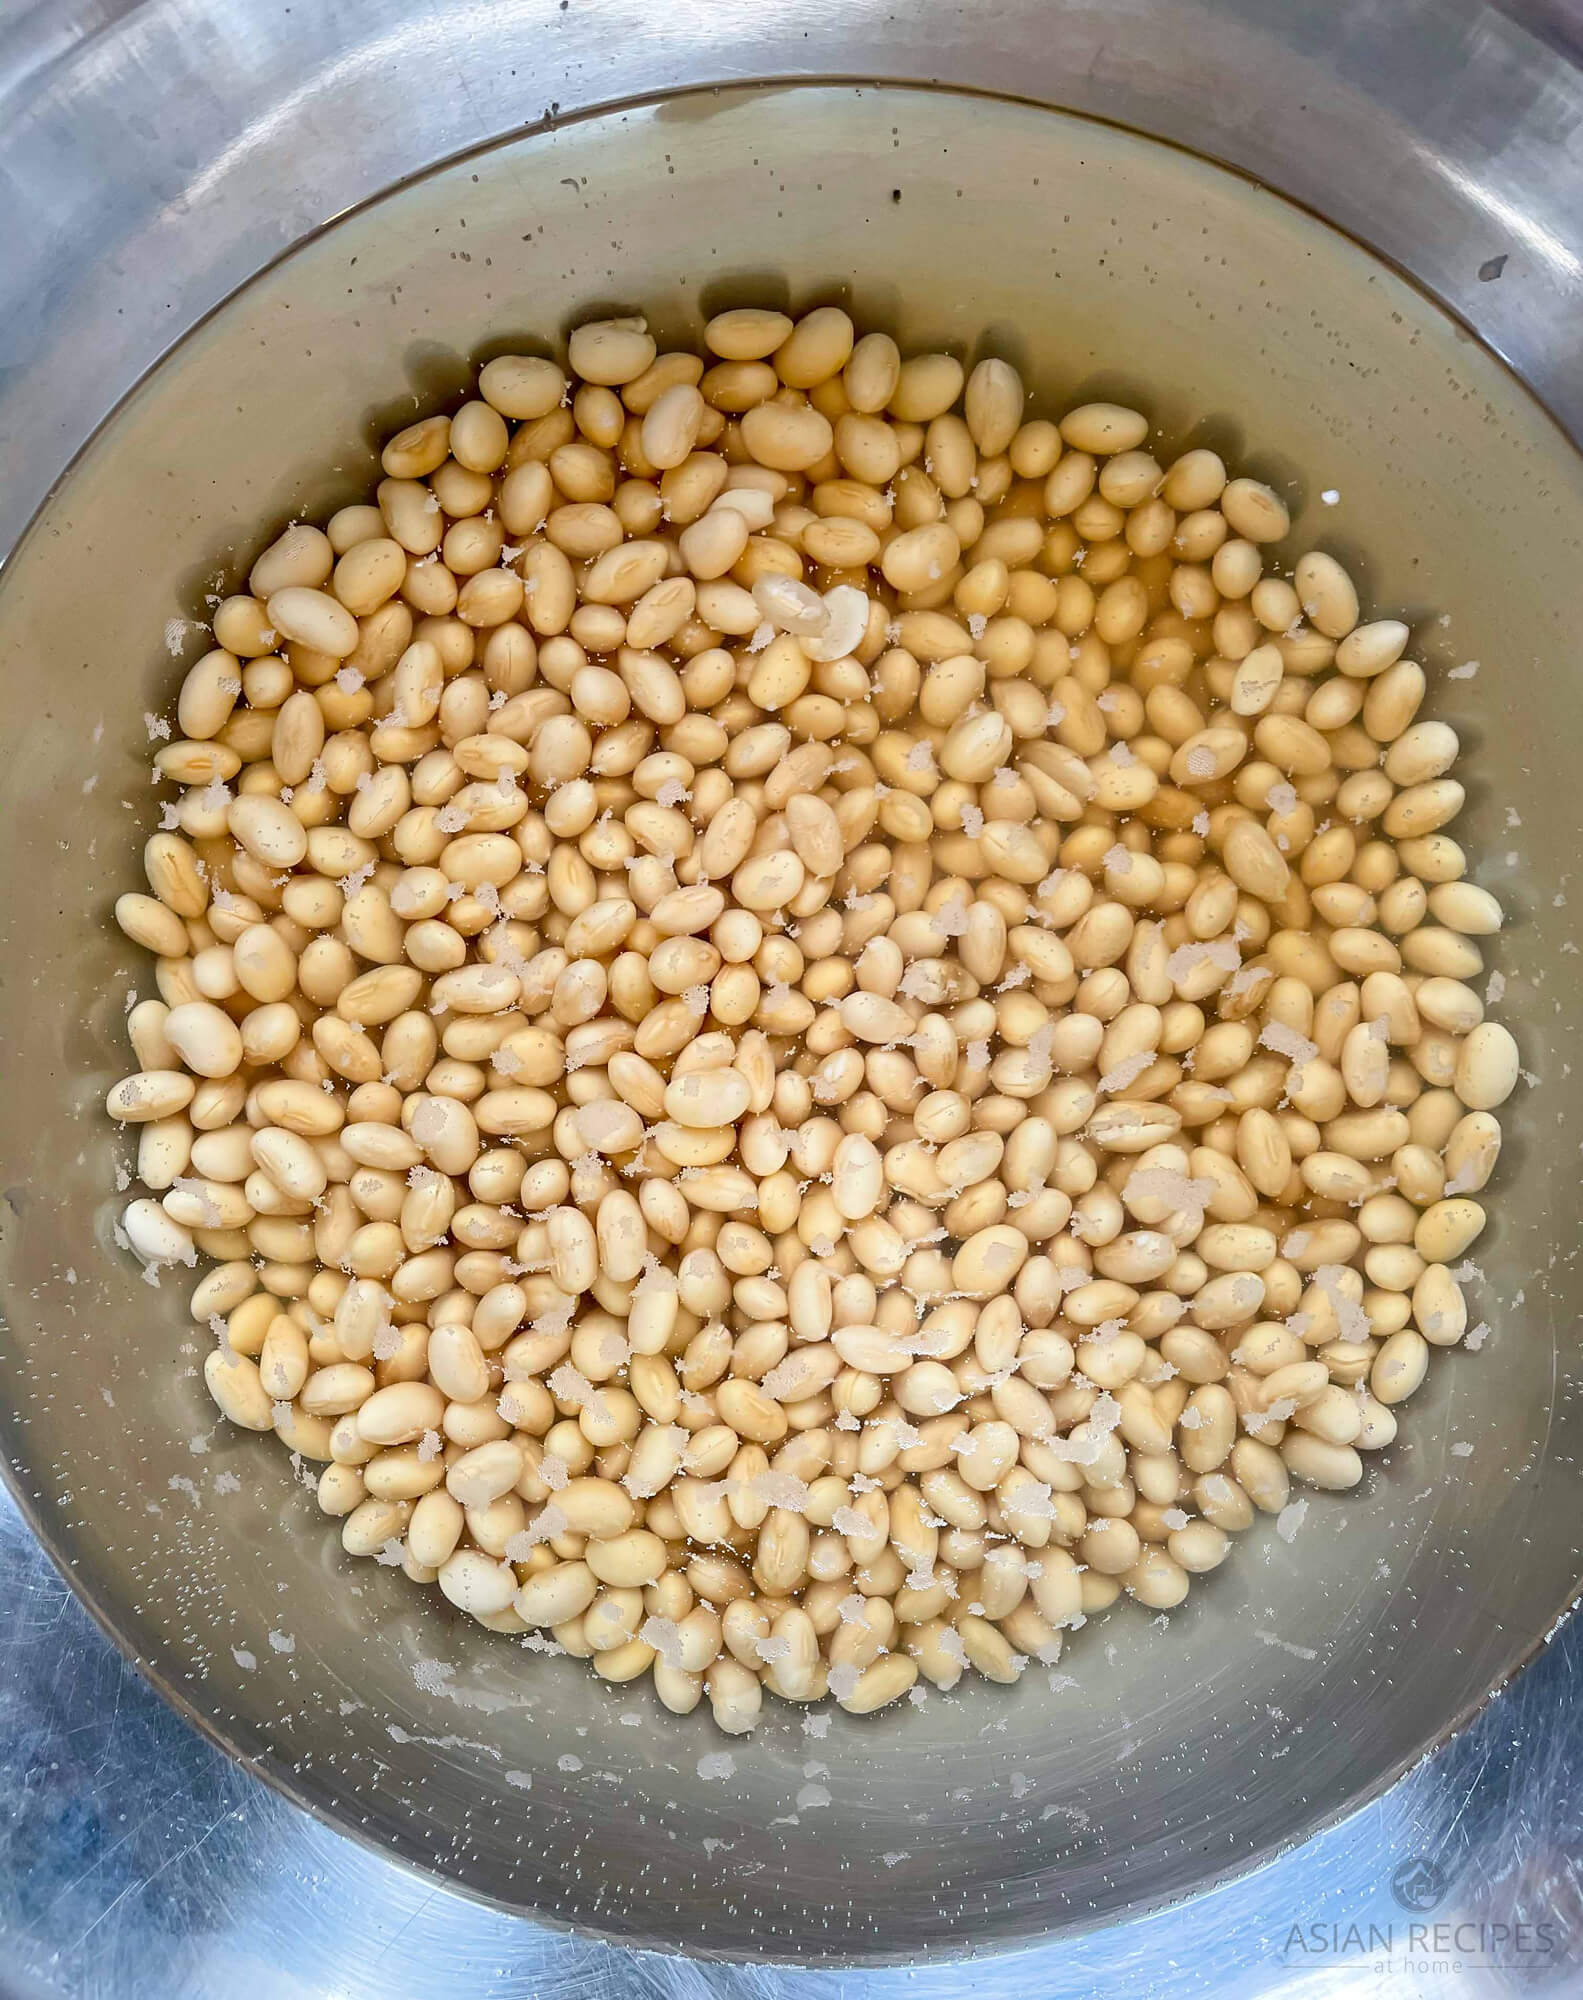 Soaking soybeans to make our fermented soybean (natto) recipe.